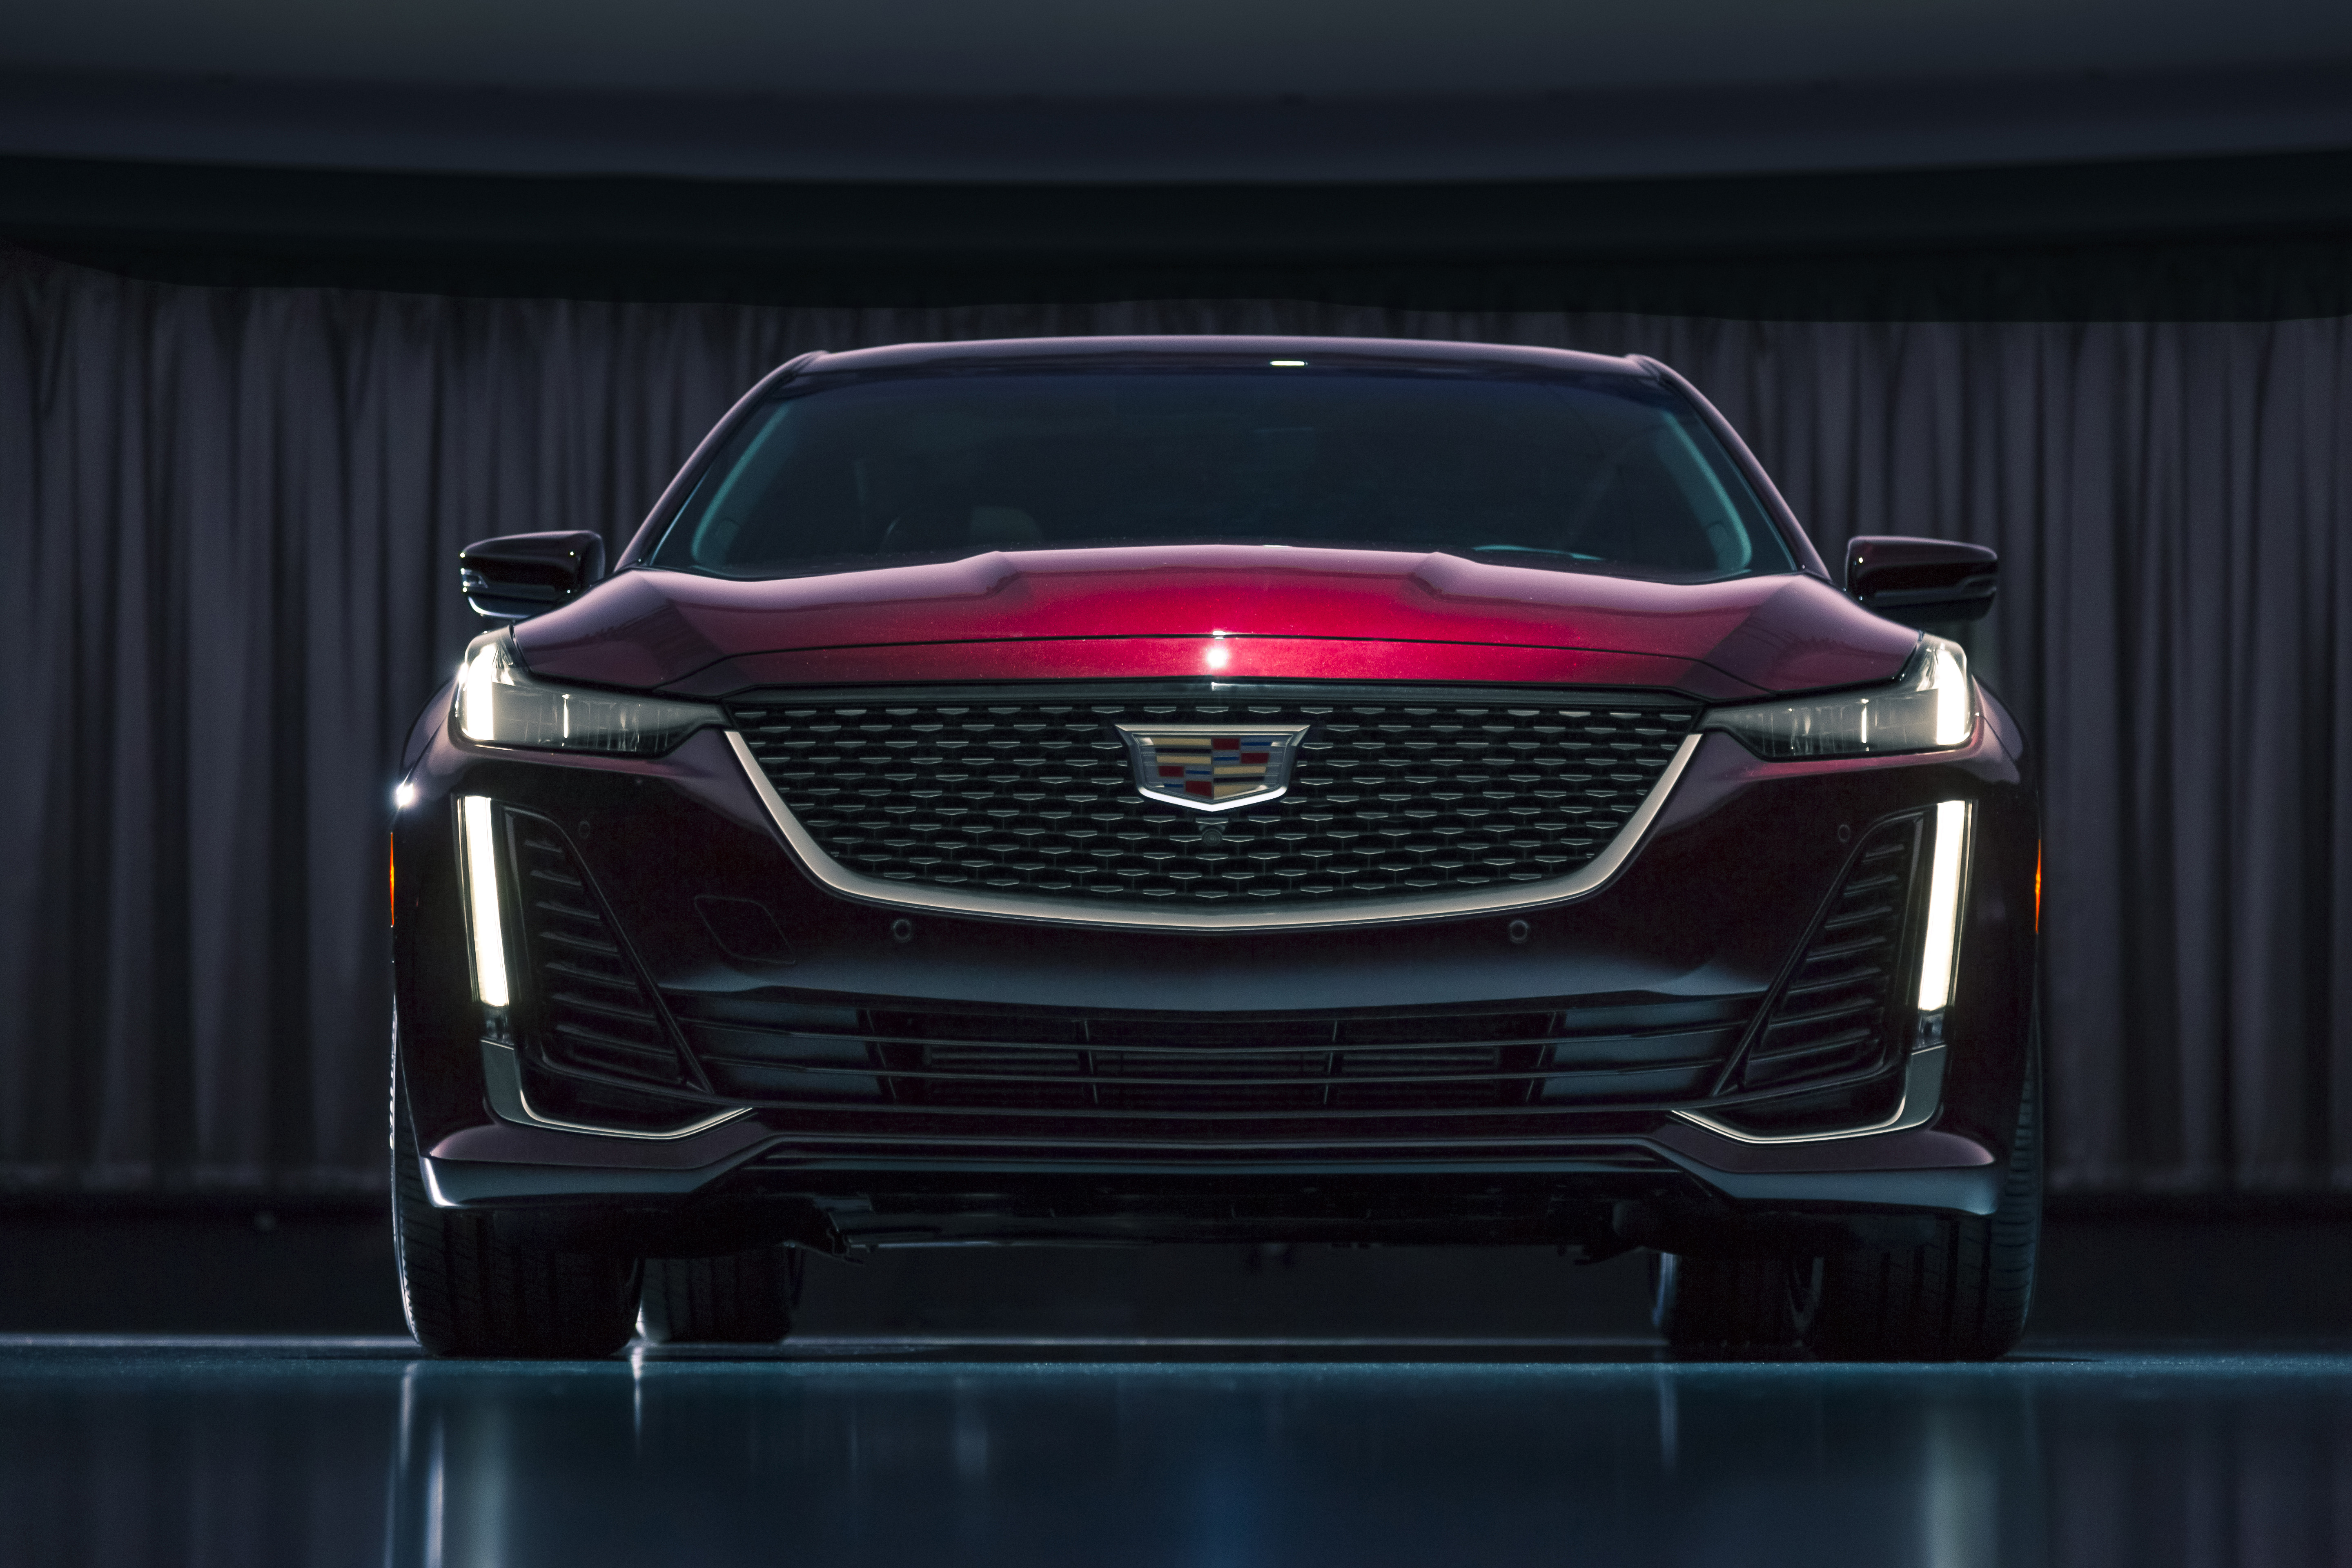 Cadillac CT6 Plug-In hd specifications